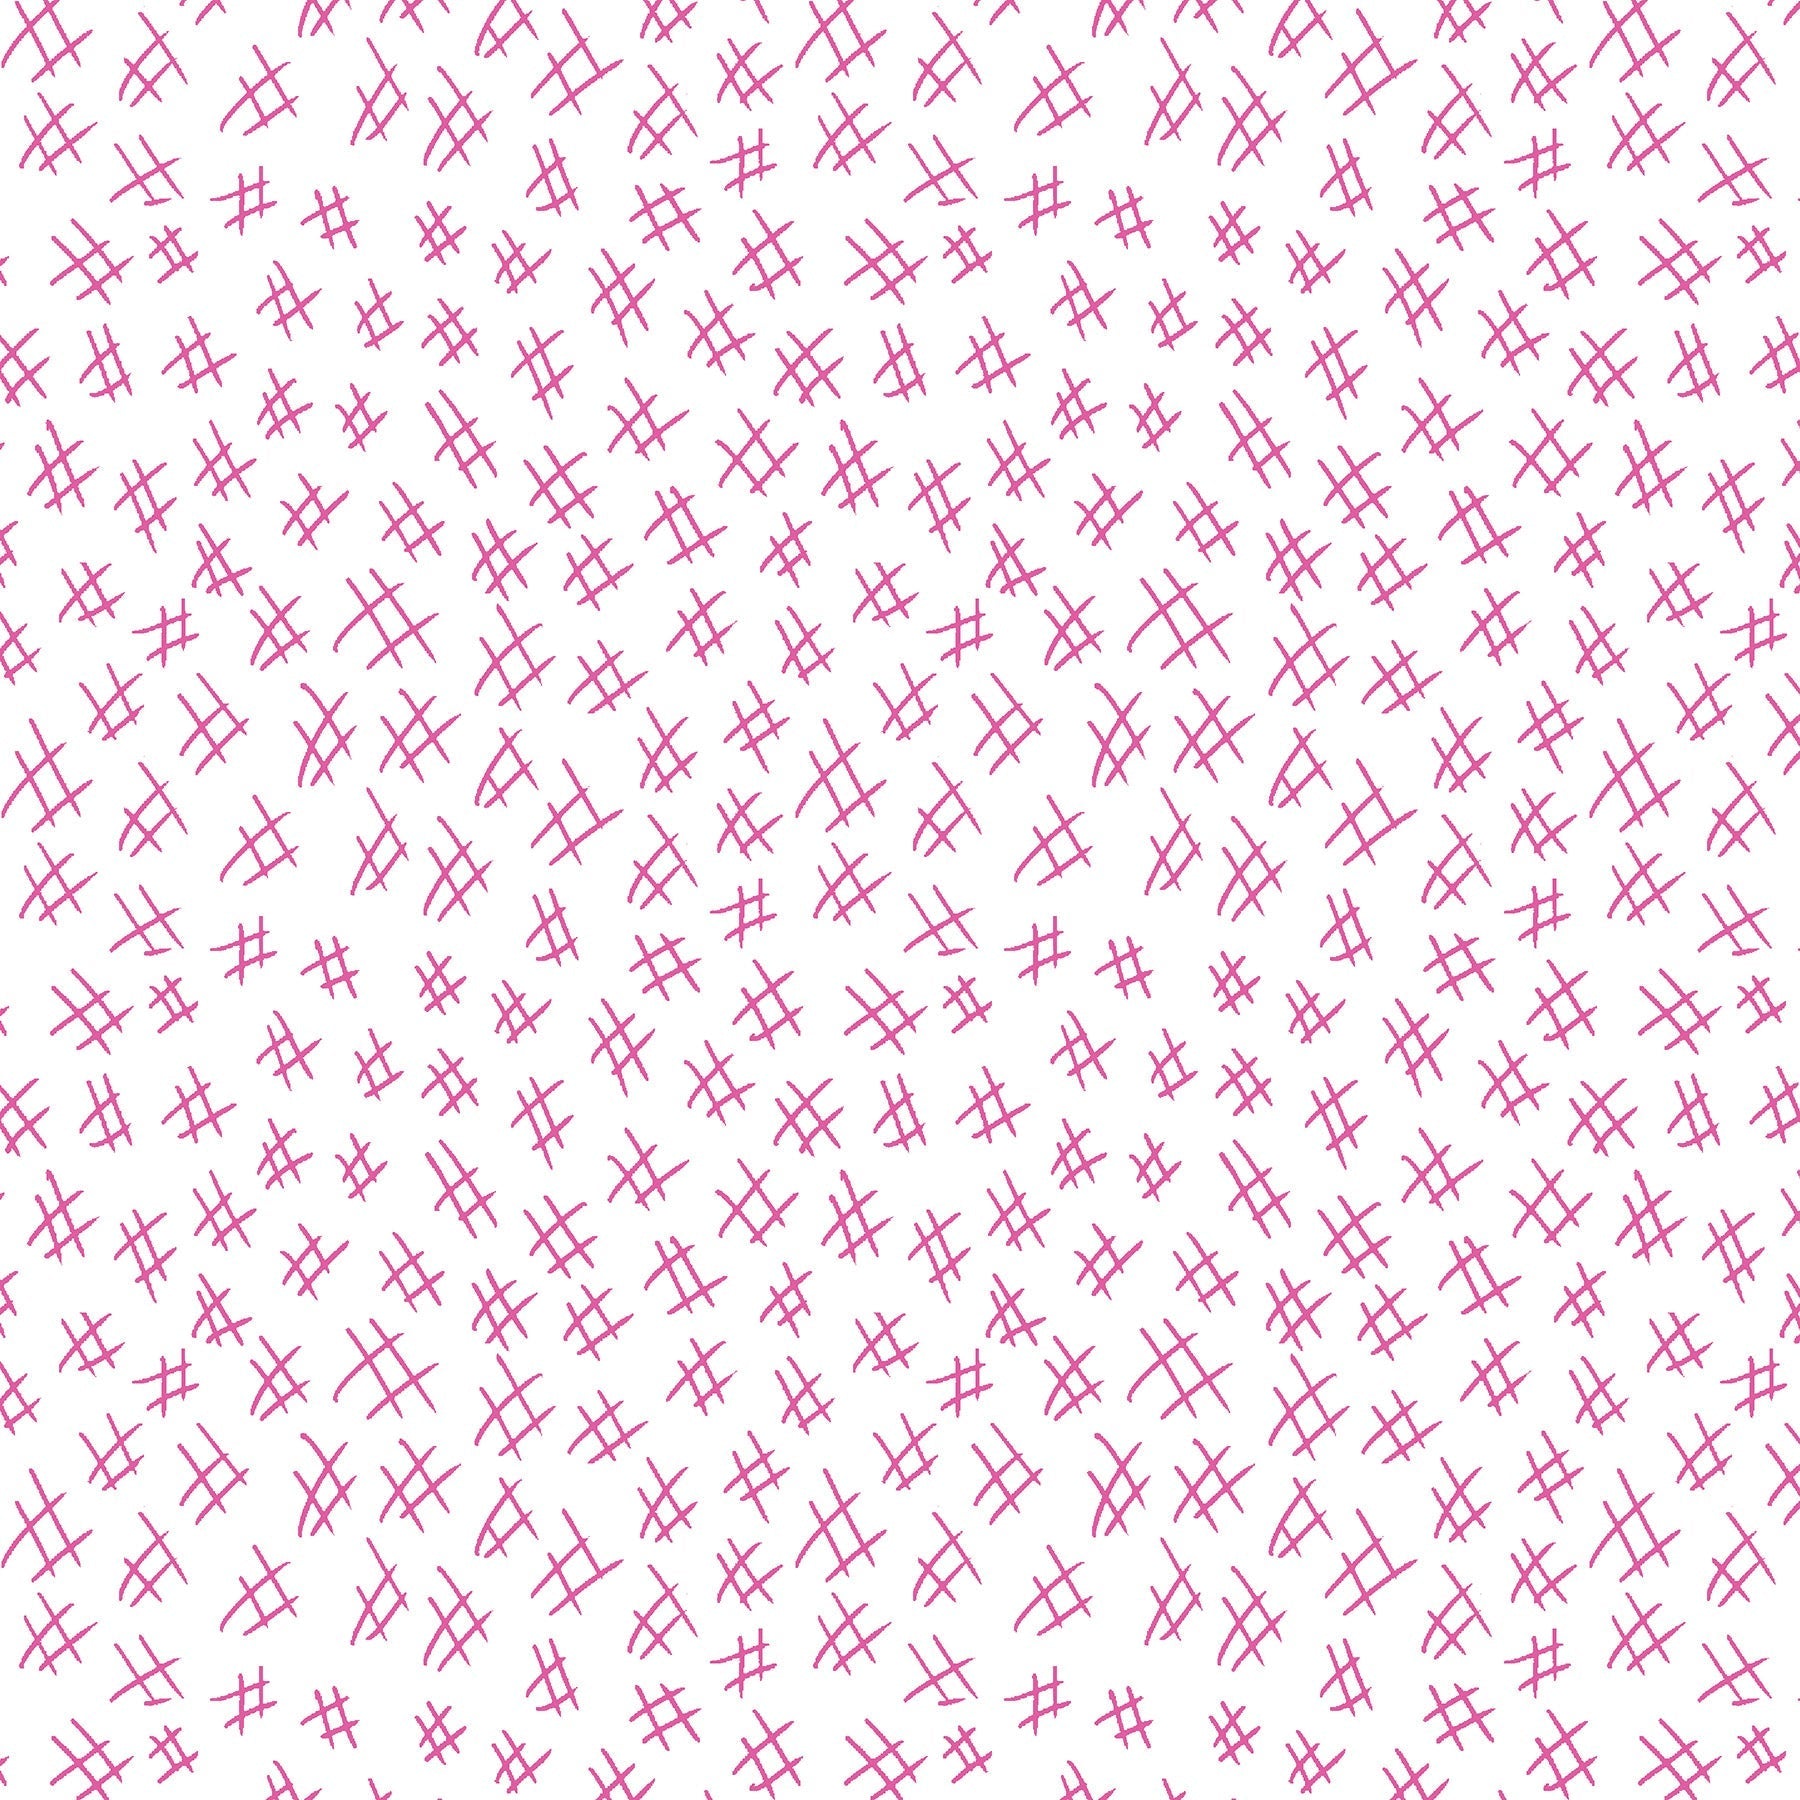  Hashtags in fuschia and white (13263-22)  is from Stitchy by Christa Watson for Benartex. The hashtags print features a white background with fuschia hashtags to provide a light tone for the collection and will serve well as a background fabric, a contrast fabric, or any where the eye needs to rest in your project.